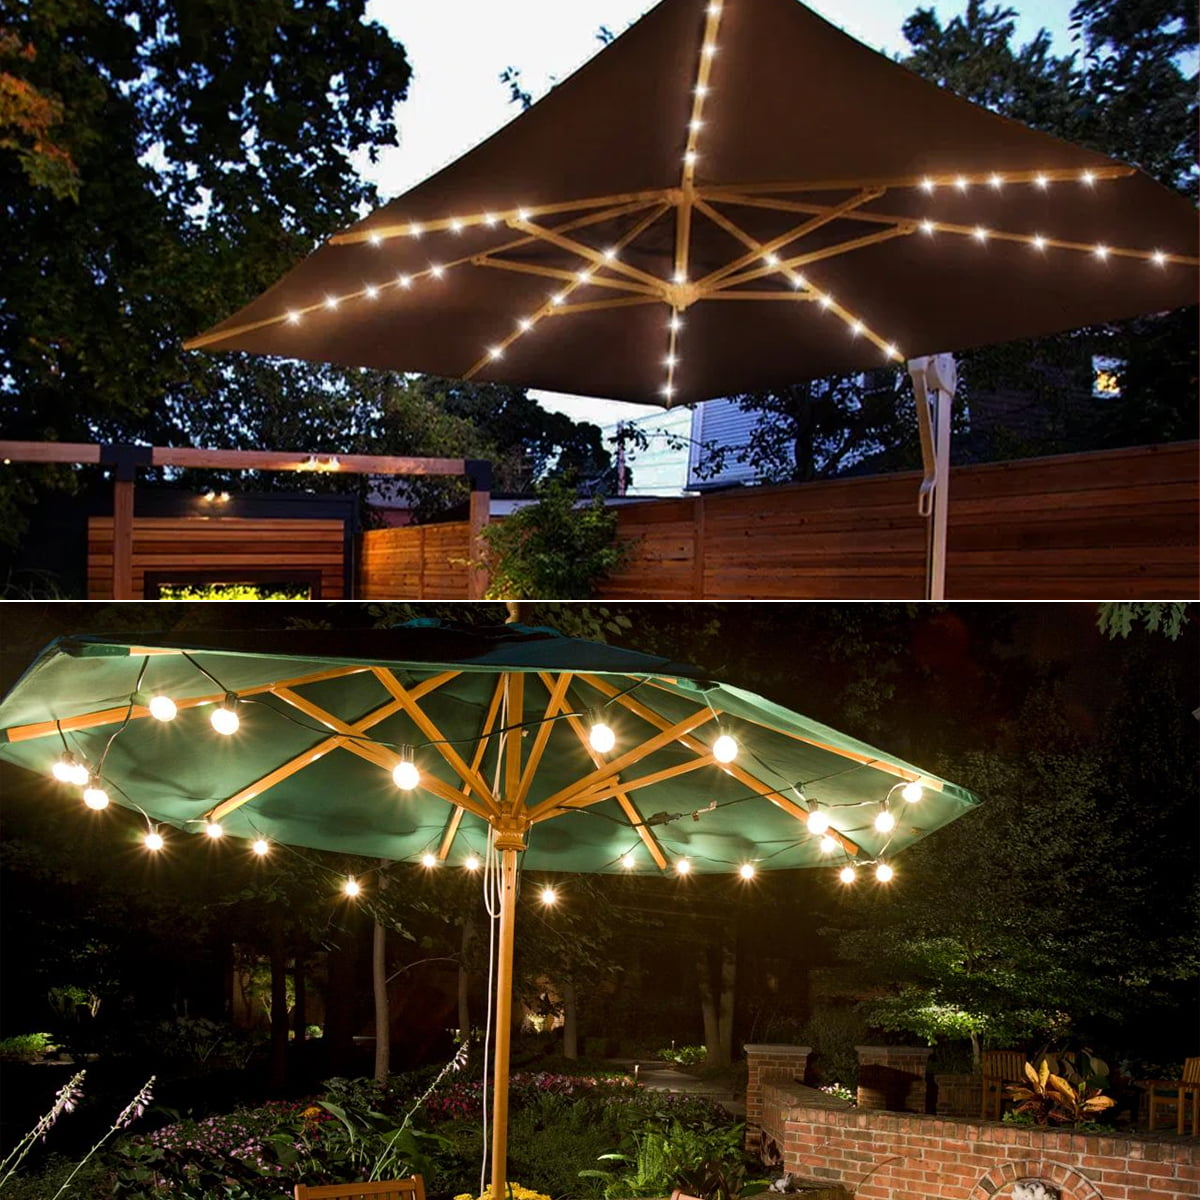 Garden Parasol Light/Black/Battery Operated/15 Bright White LED Lights-No wires 